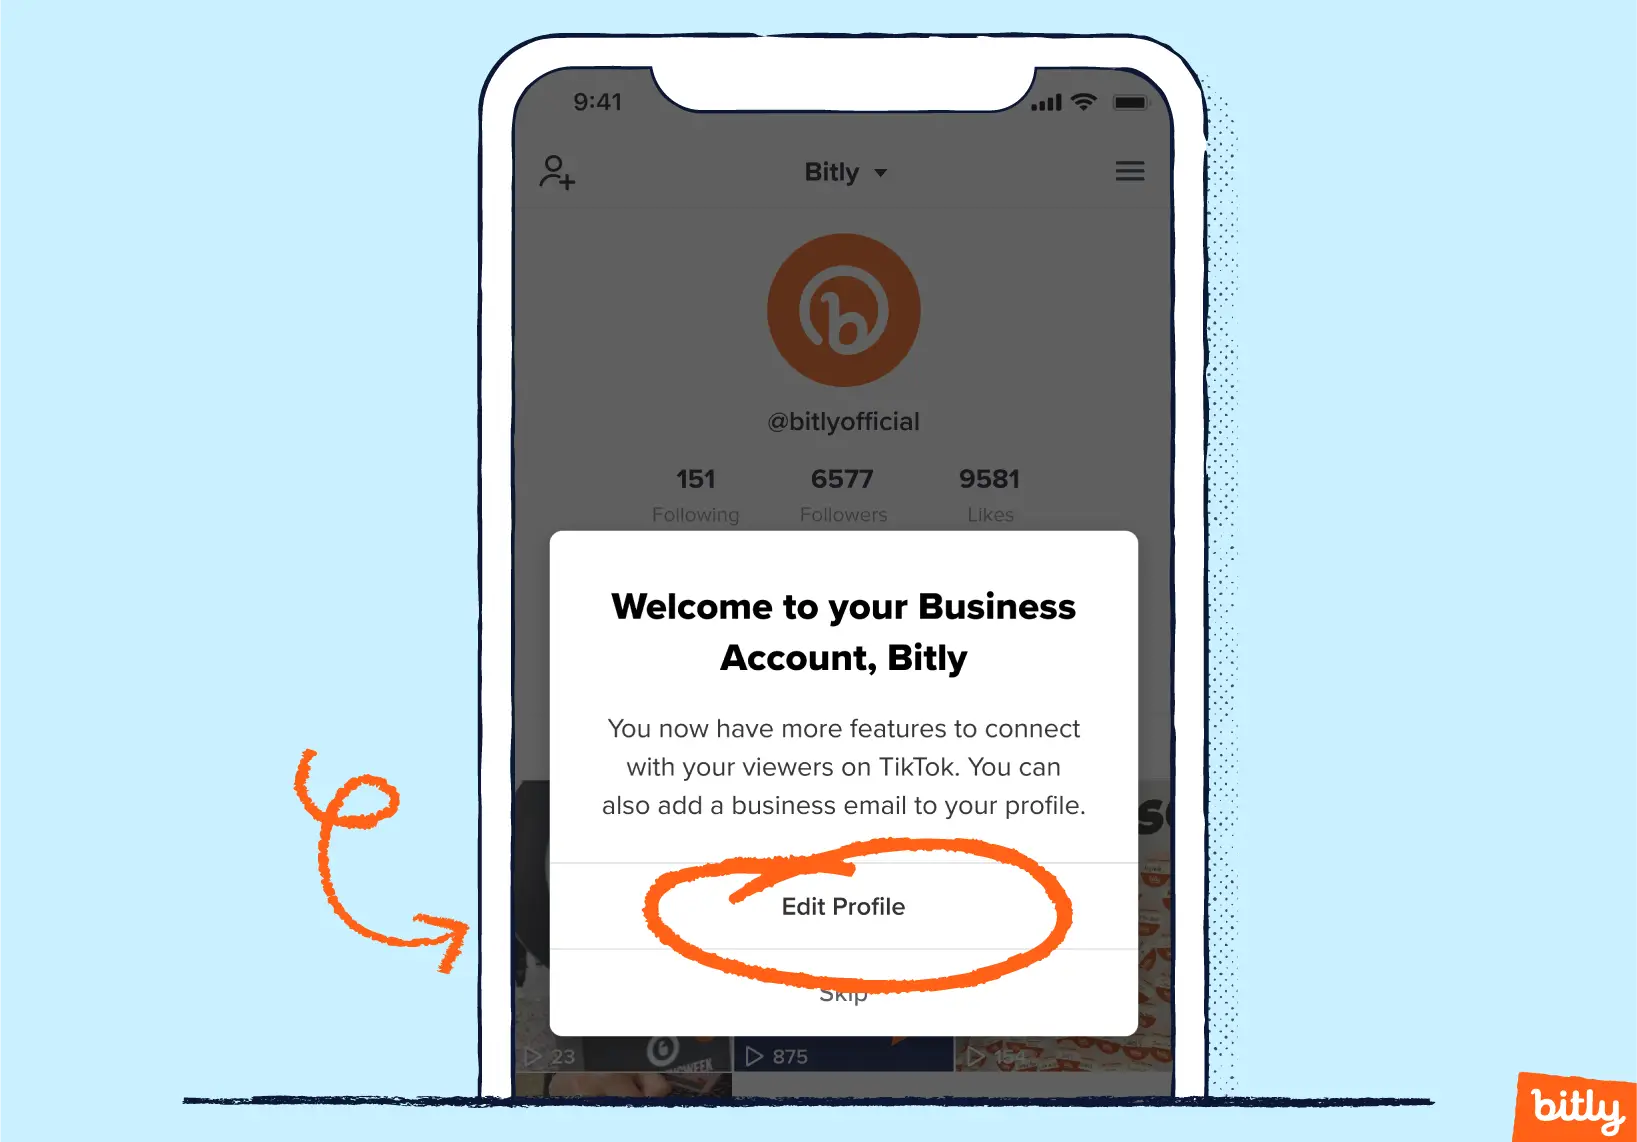 An orange arrow pointing to a the circled words Edit Profile on Bitly's TikTok page on a phone.